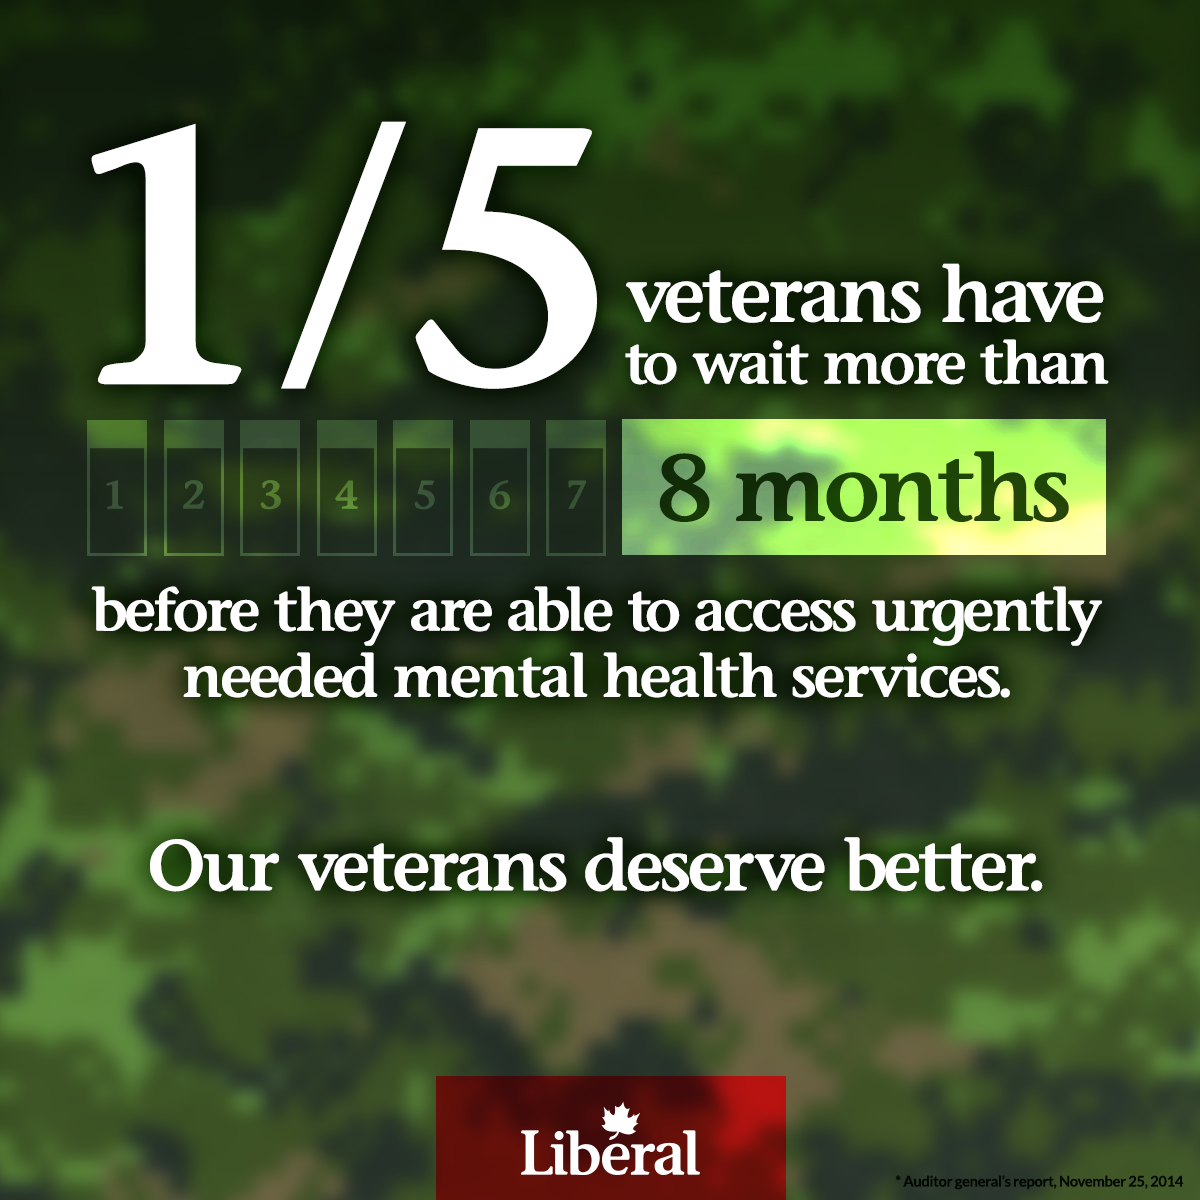 1 in 5 veterans have to wait more than 8 months before they are able to access urgently needed mental health services. Our veterans deserve better.